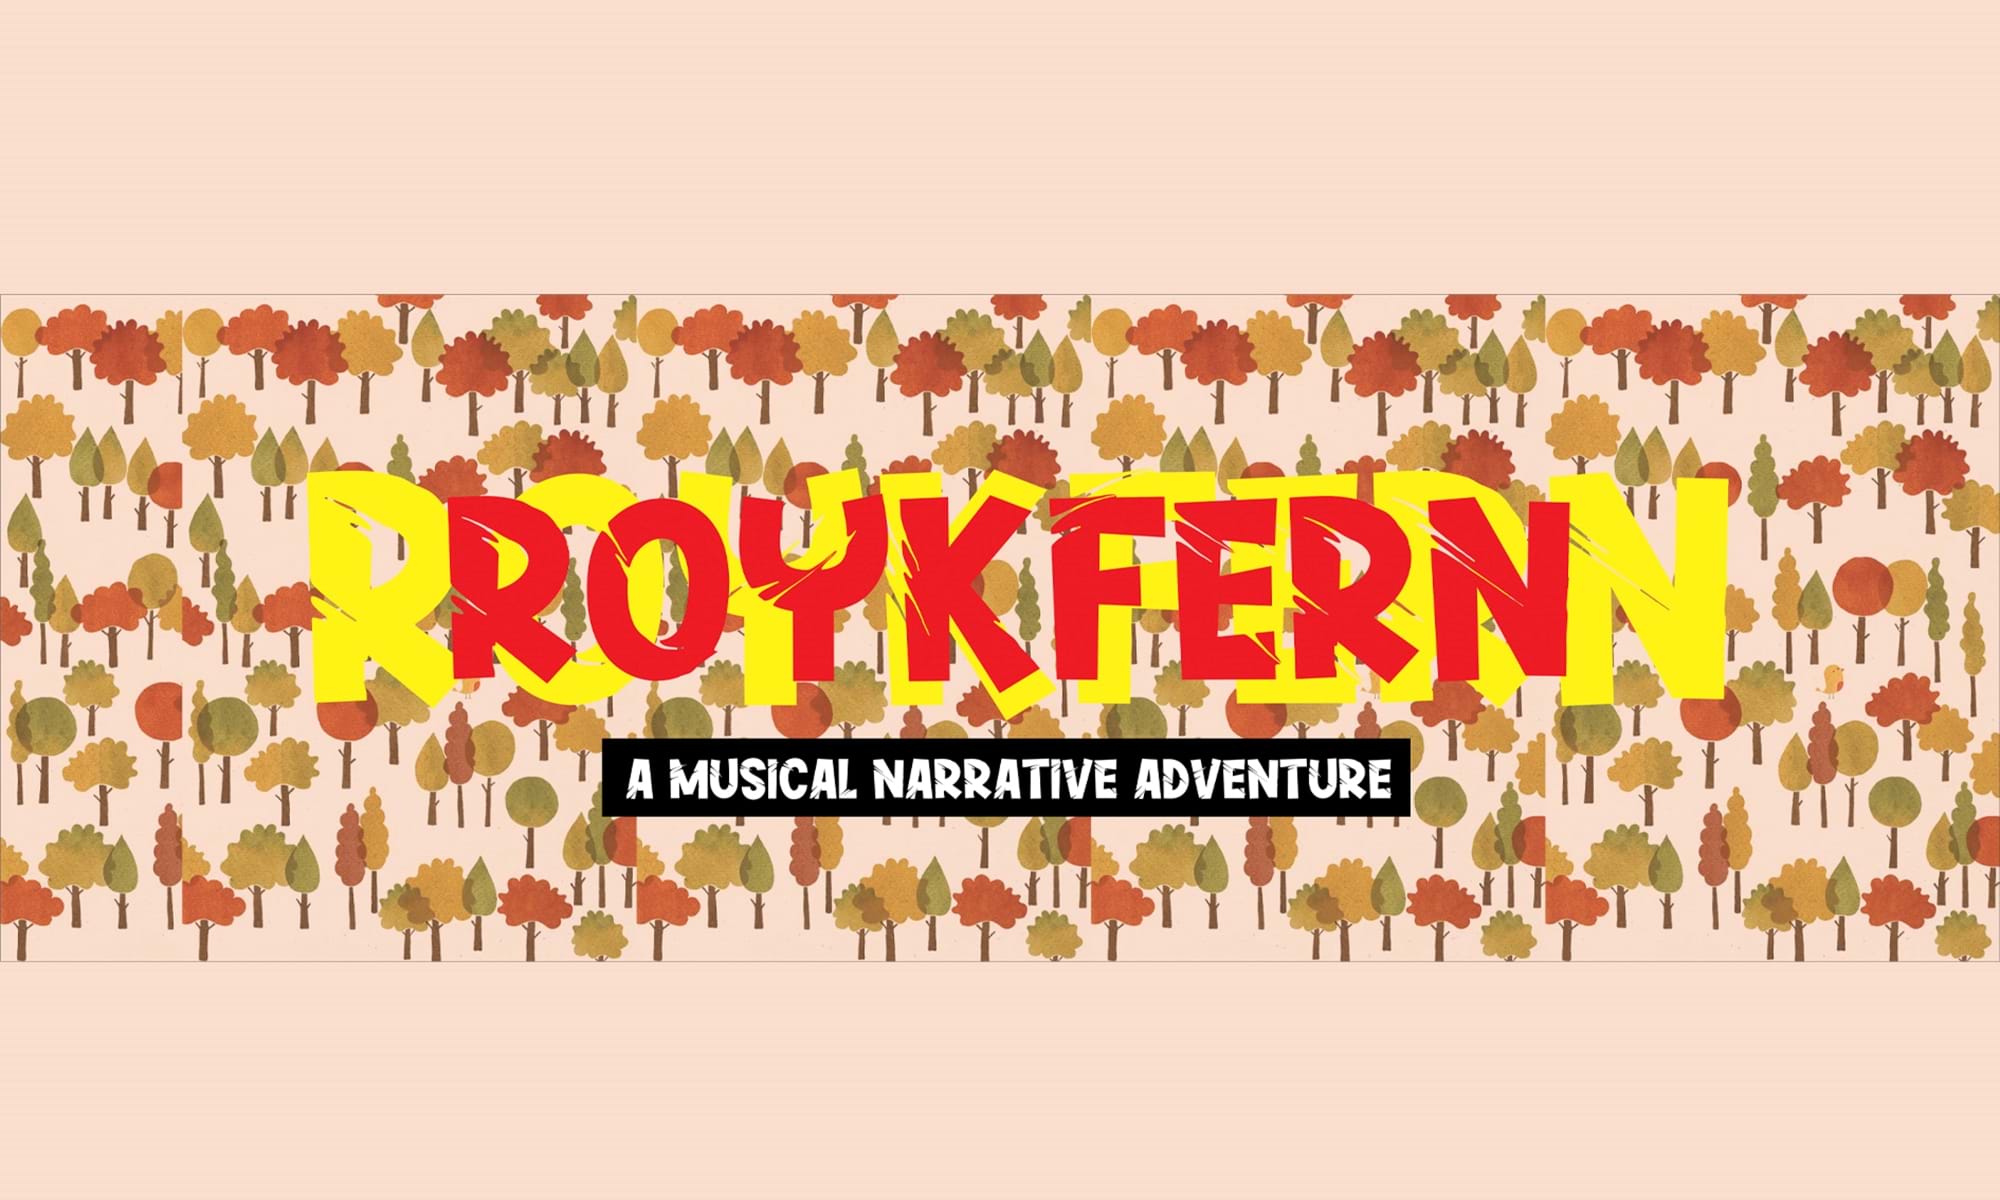 “Roykfern: A Musical Narrative Adventure” is a 2020 Digital Graduate Show project by Arrow Games, a team of students at Abertay University.